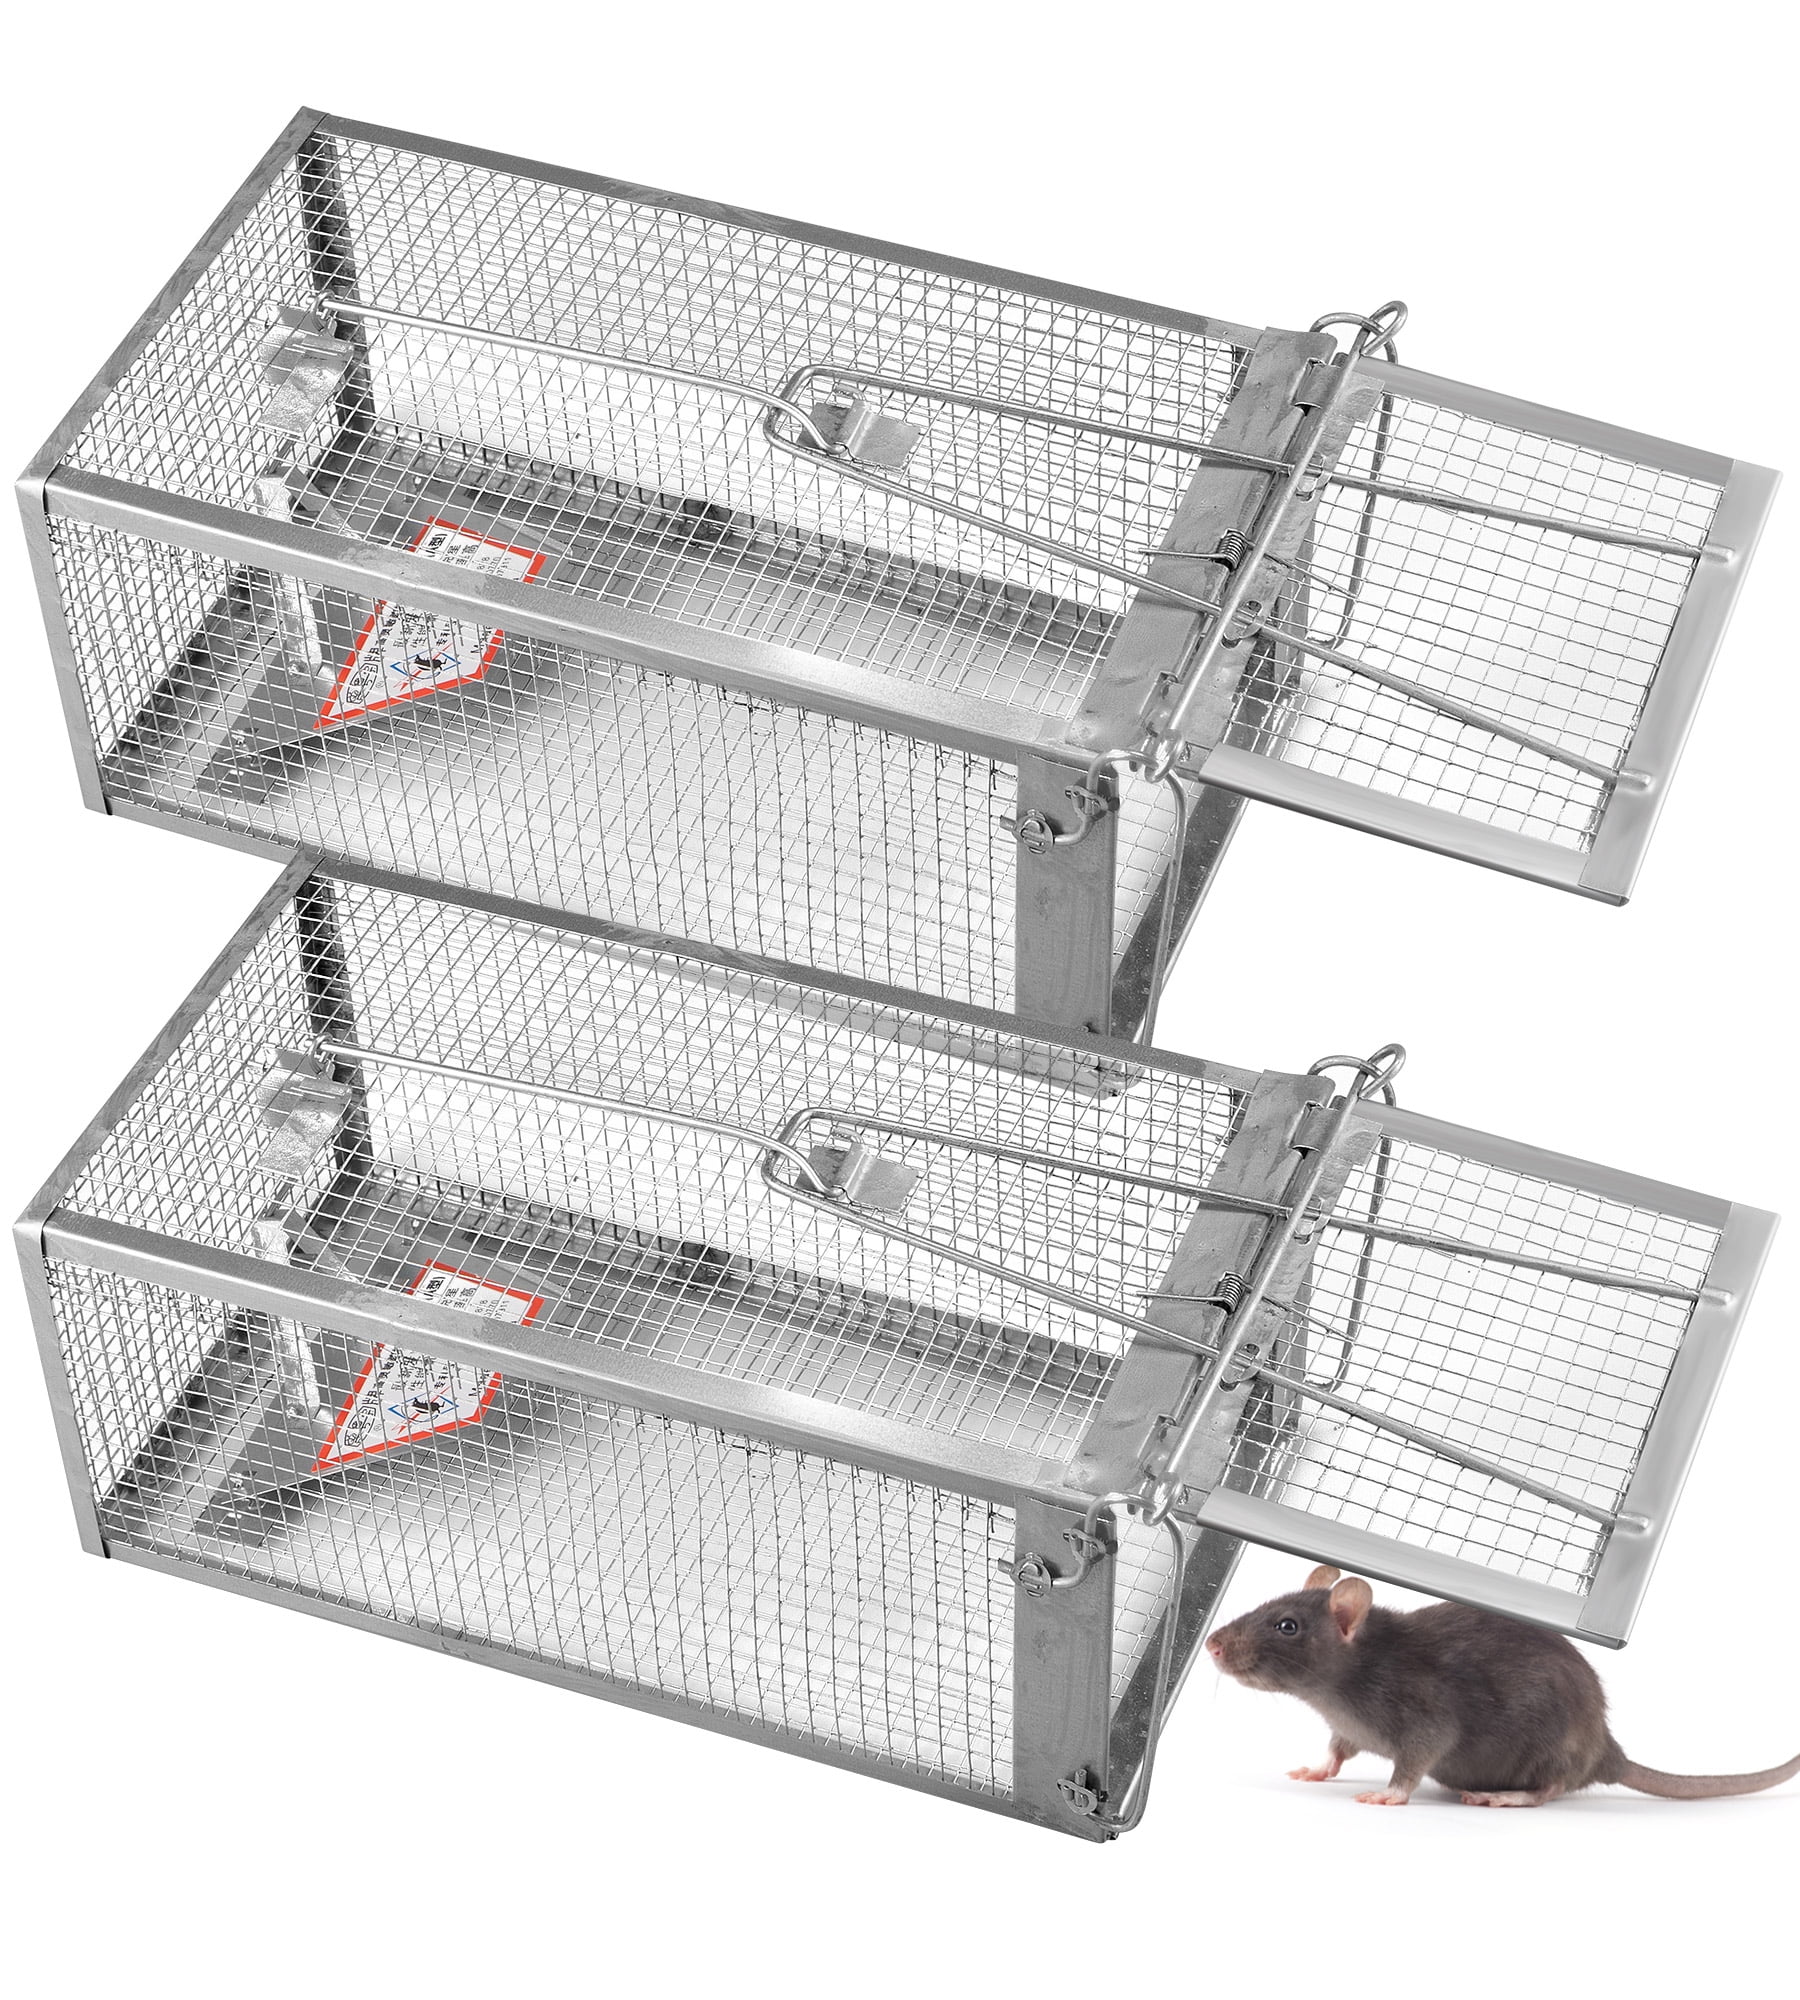 Dropship 2Pcs Humane Live Mouse Trap Reusable Rat Rodent Trap Catch Release  Cage Safe For Family Children Pets Easy Setup to Sell Online at a Lower  Price